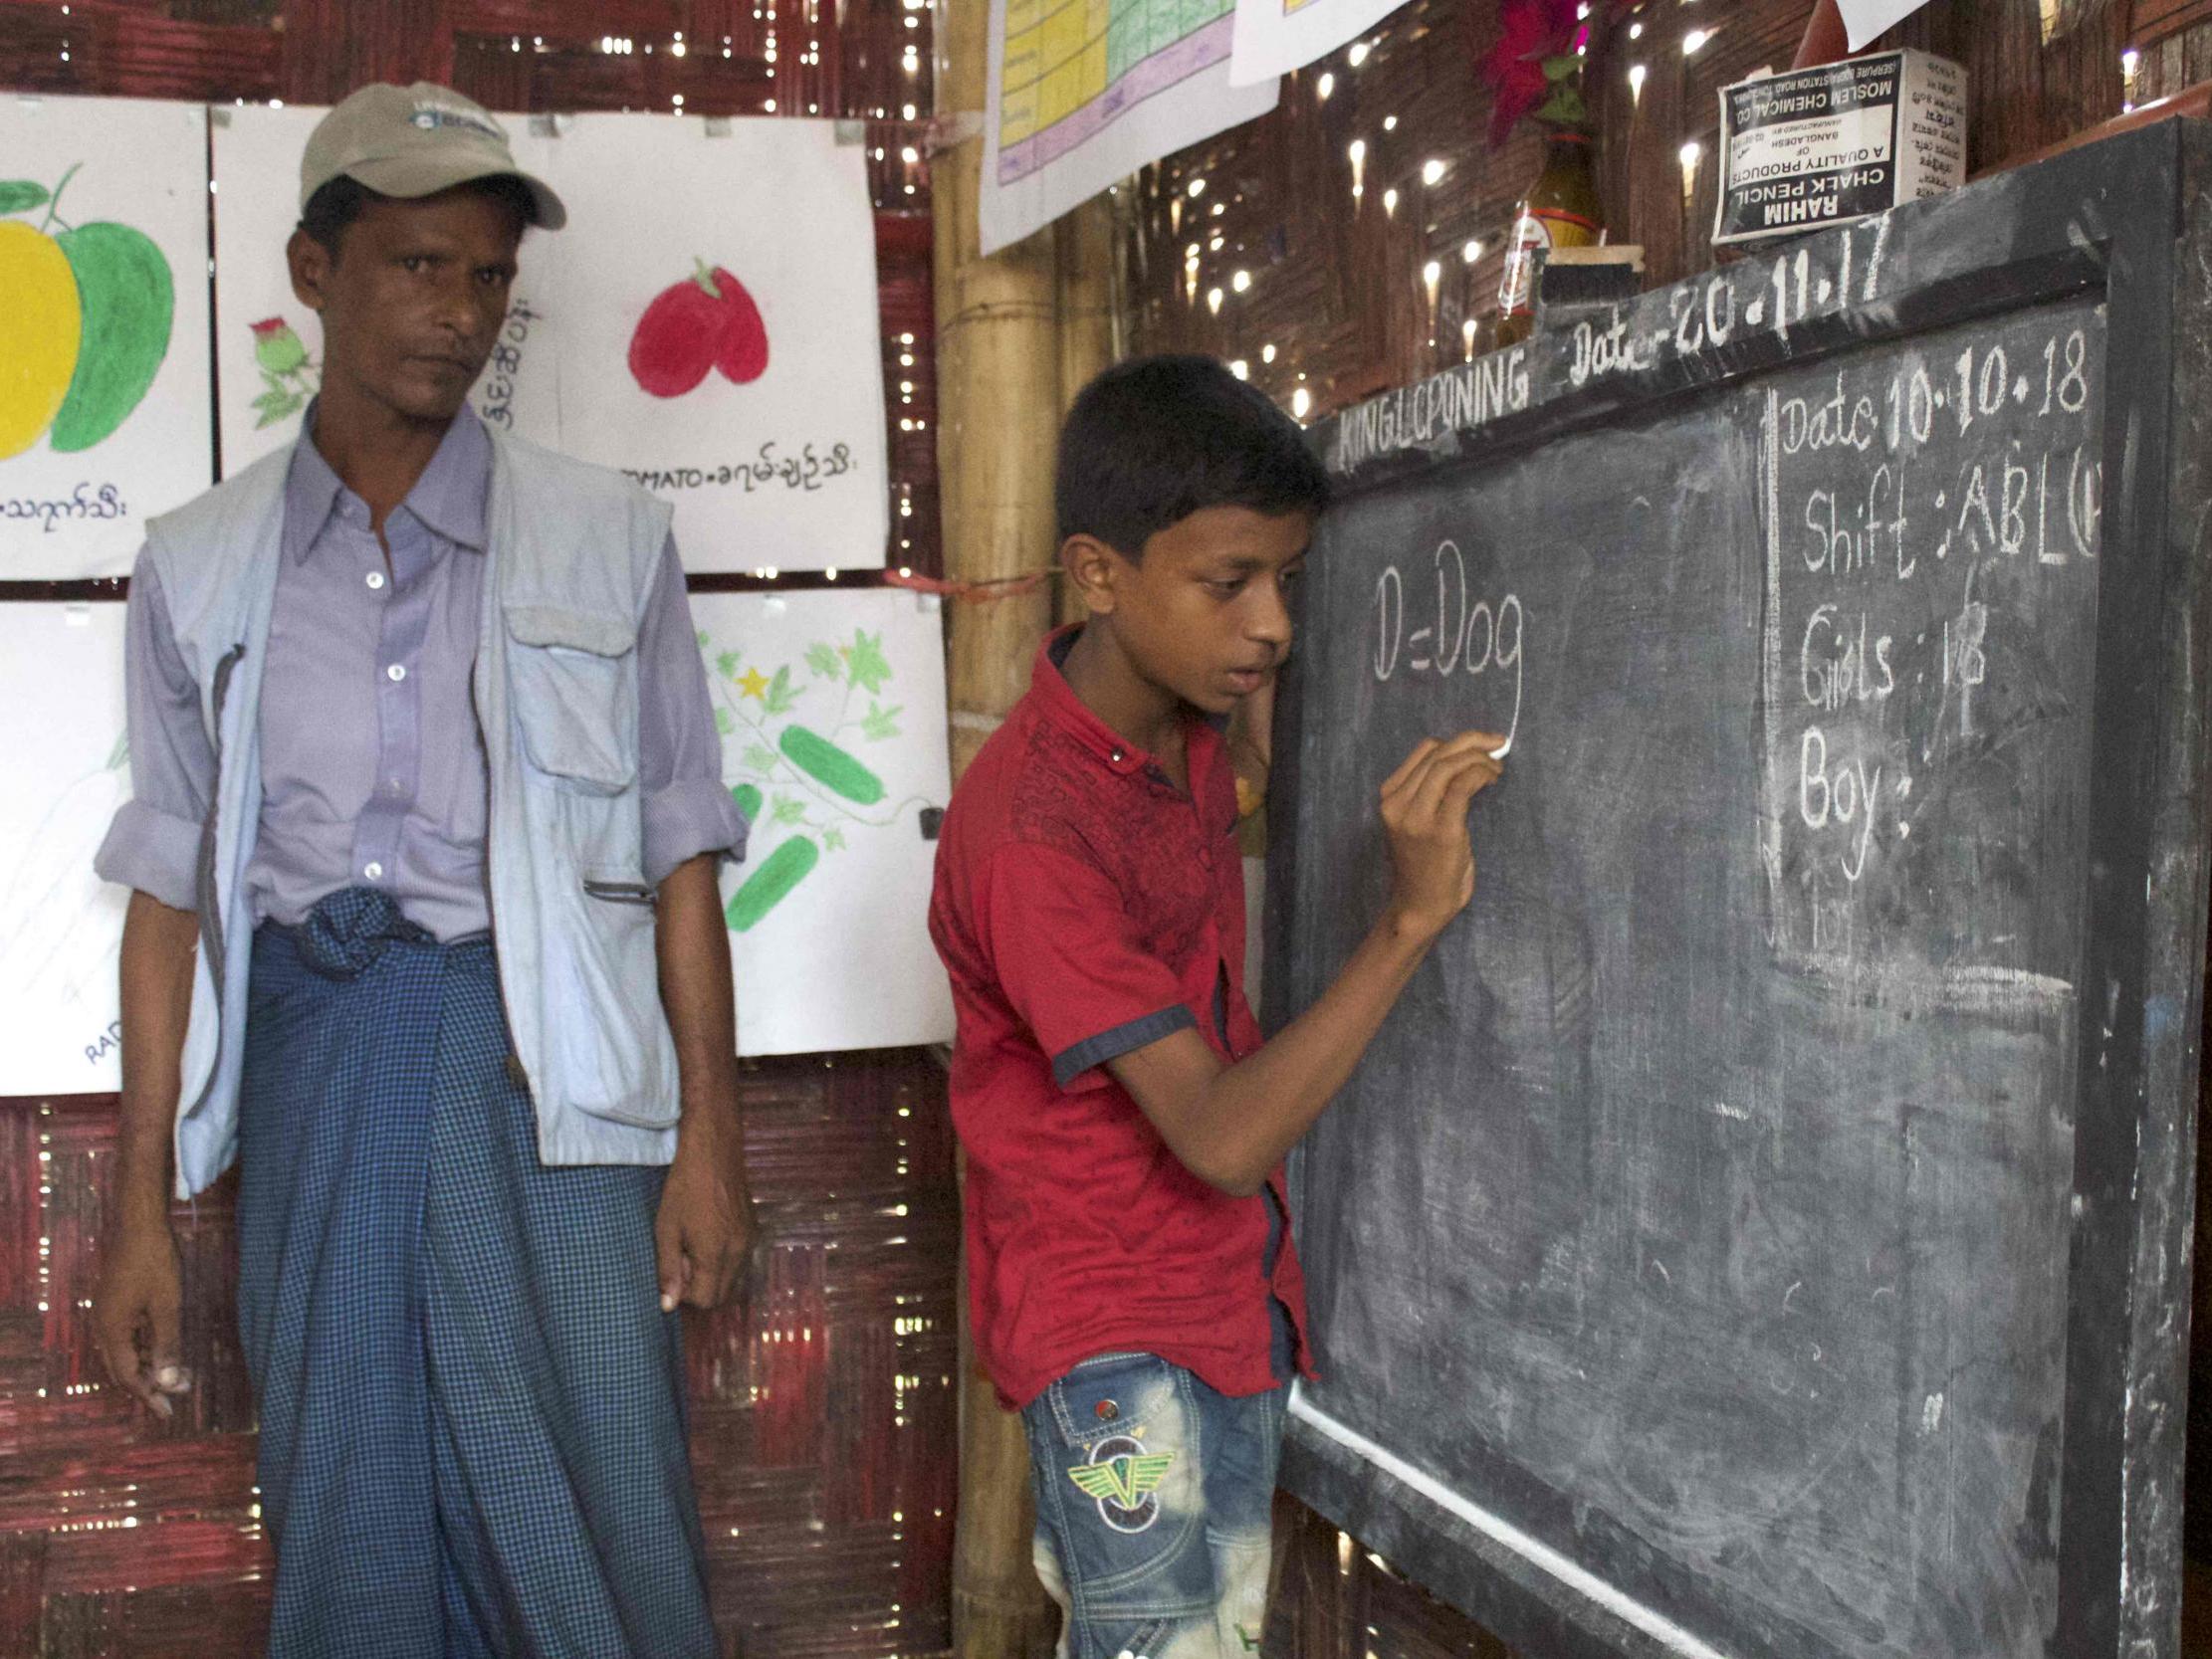 Hashim, 11, is a Rohingya who came to Bangladesh with his family in August last year. He hopes to become a teacher and likes learning English so he can communicate with the world (Adam Withnall)